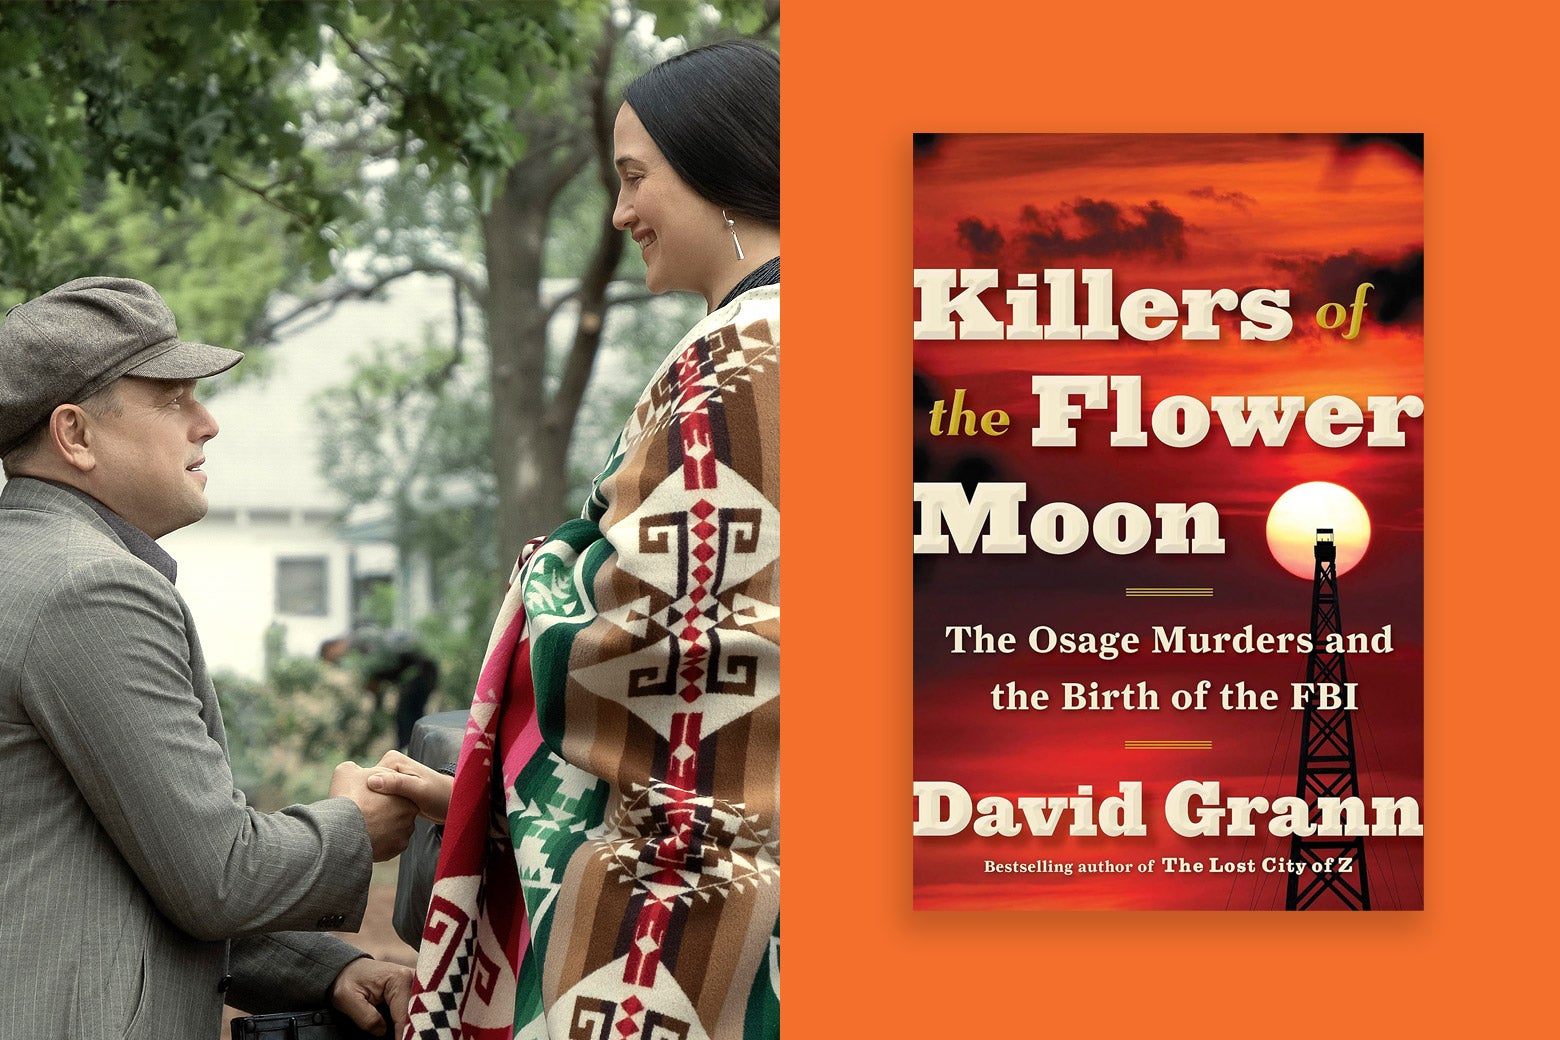 Killers of the Flower Moon’s Author on the Changes the Movie Makes to